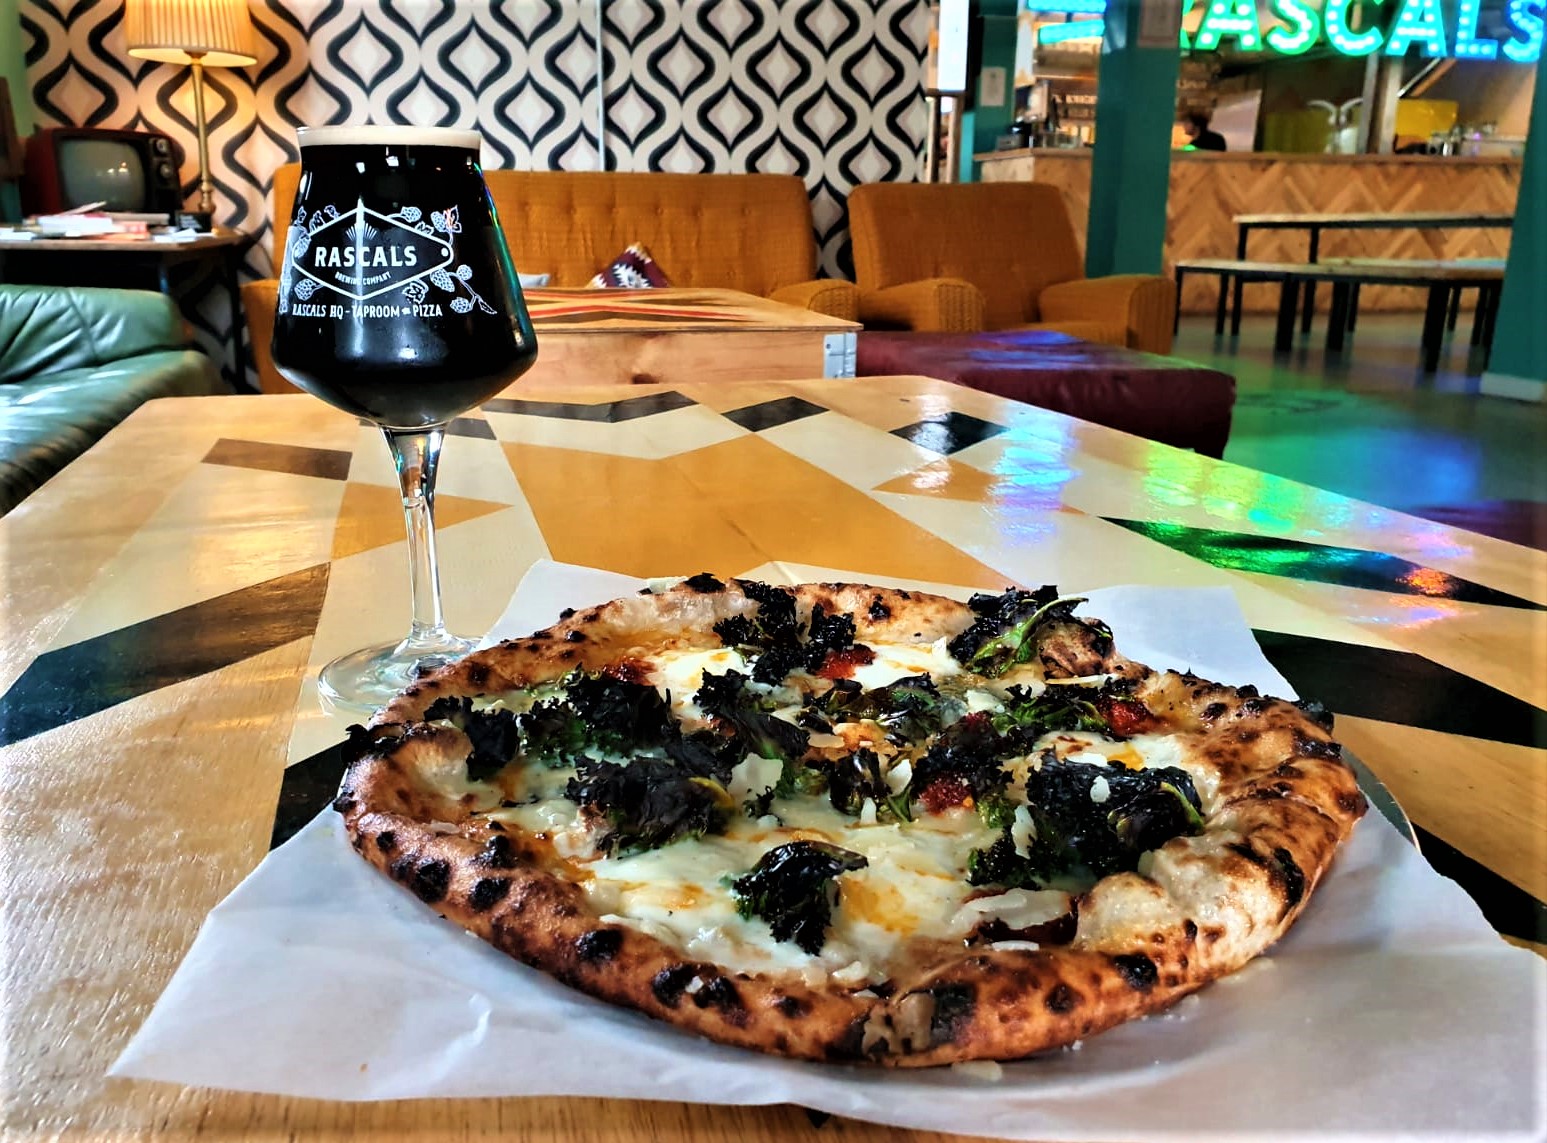 Tasty Irish craft beer from Rascals Brewing and a fresh wood-fired pizza, the best in Dublin